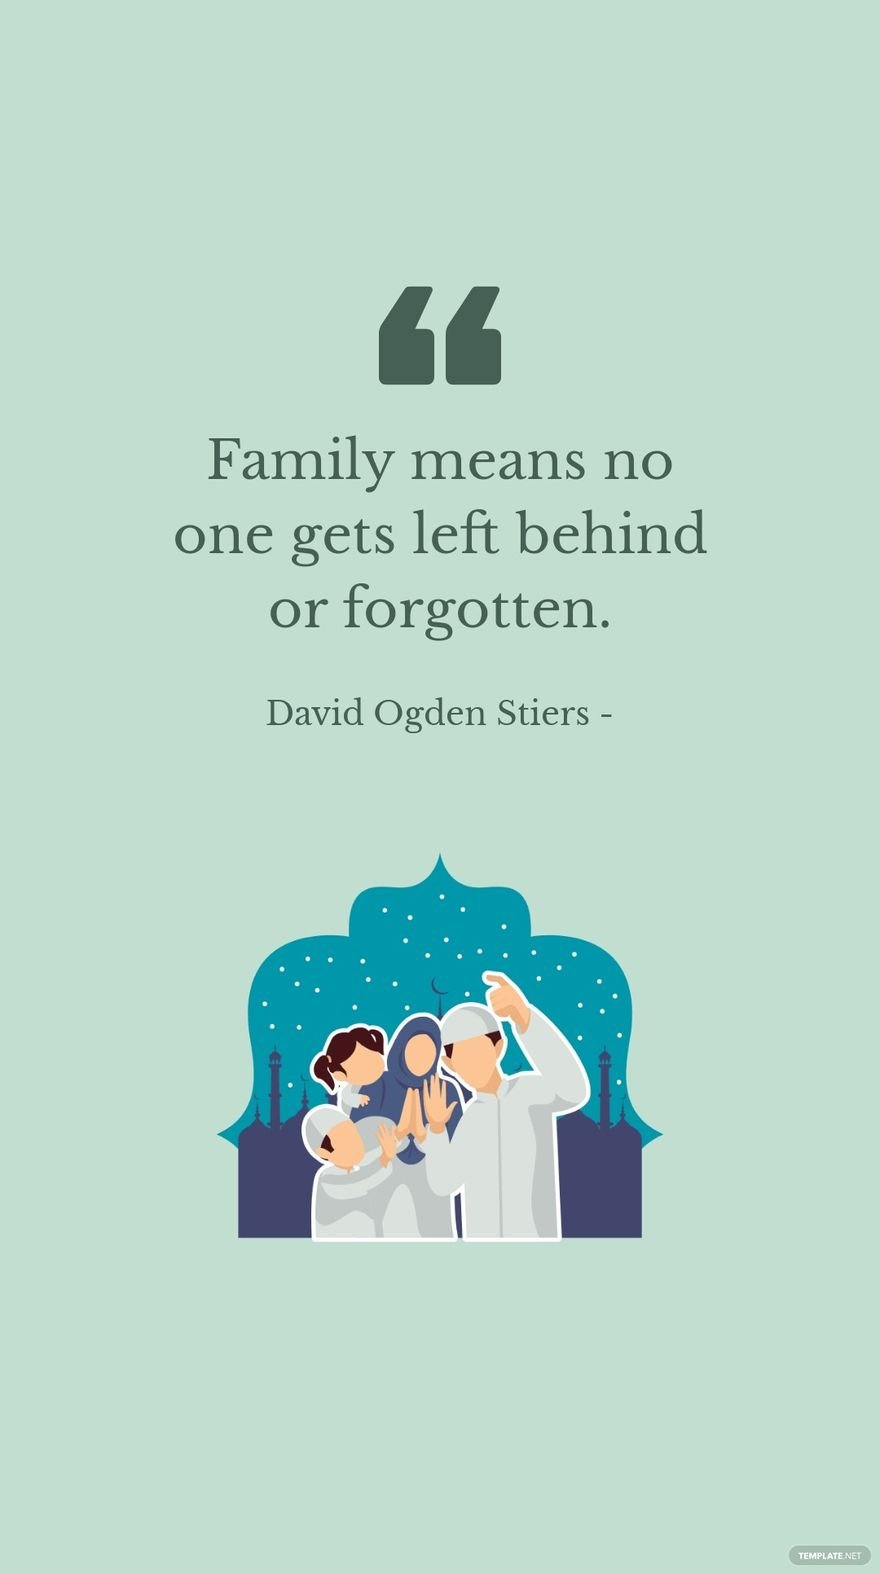 Free David Ogden Stiers - Family means no one gets left behind or forgotten. in JPG